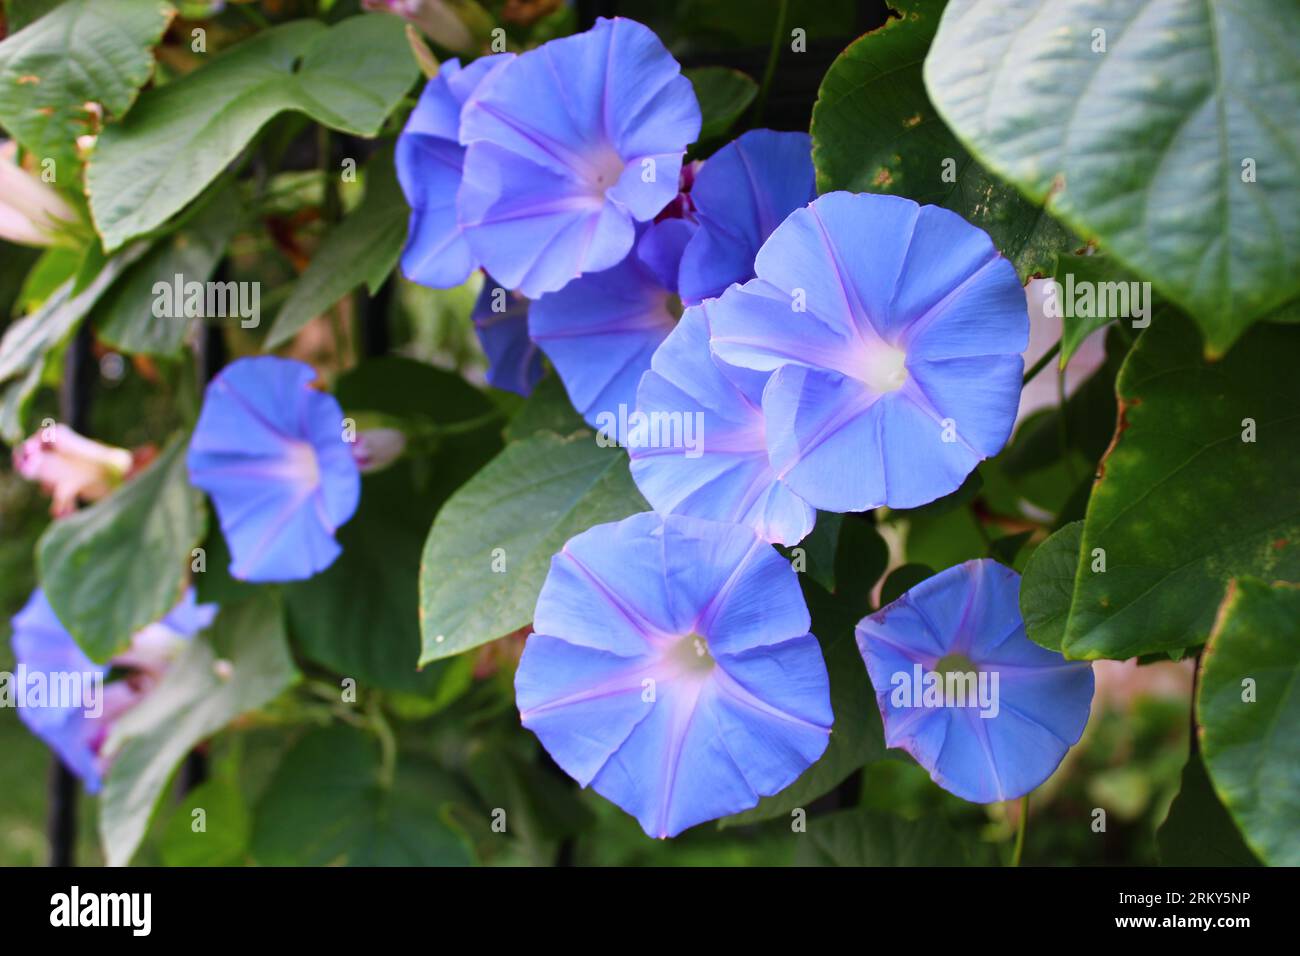 Ipomoea tricolor, the Mexican morning glory or just morning glory, is a species of flowering plant in the family Convolvulaceae,. High quality photo Stock Photo